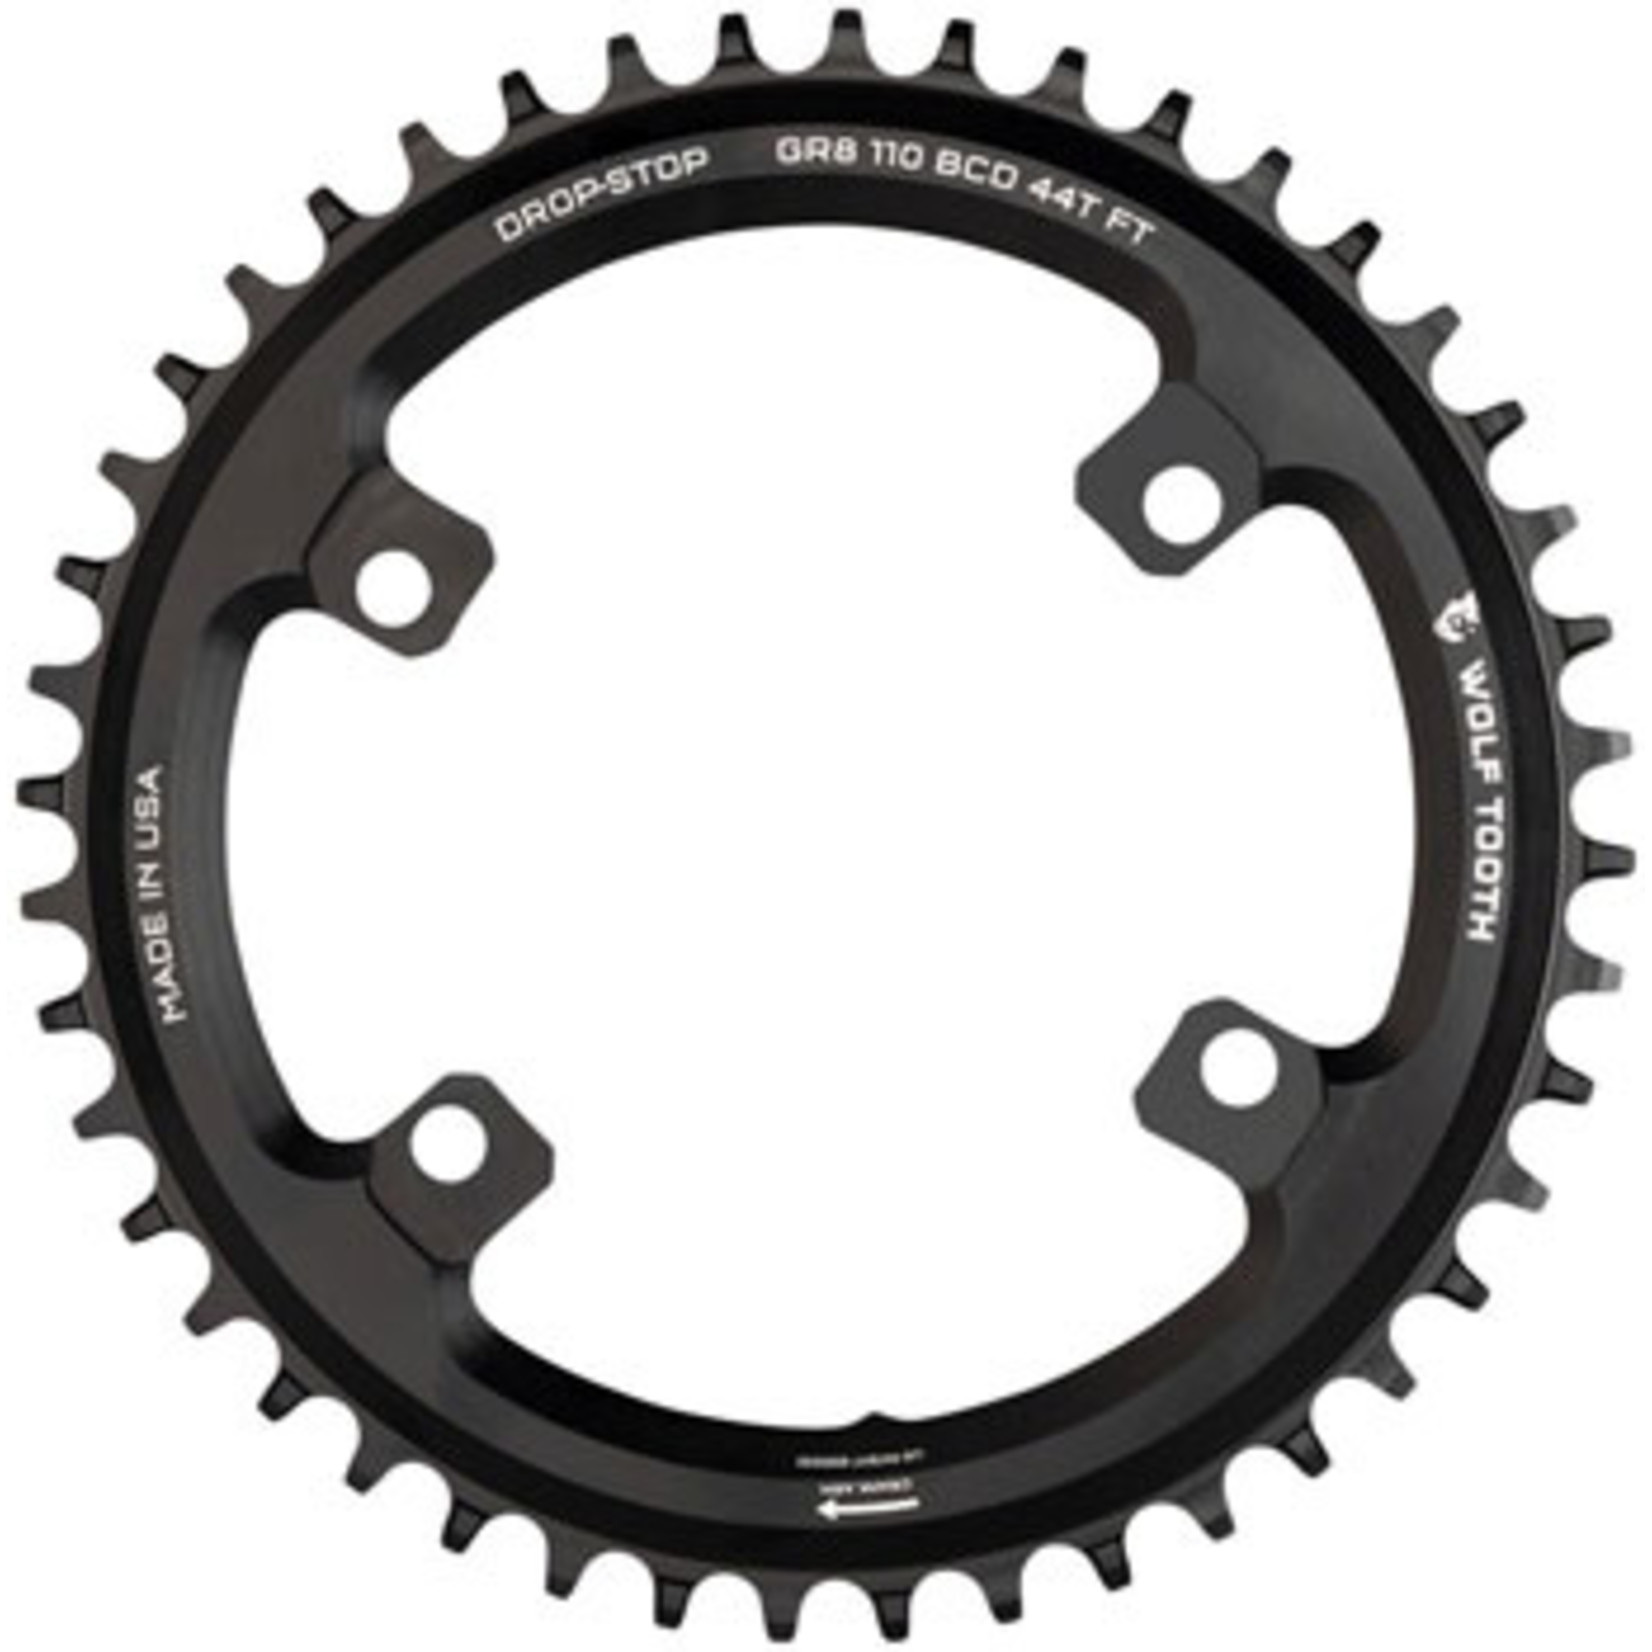 Wolf Tooth Wolf Tooth Shimano 110 Asymmetric BCD Chainring - 46t 110 Asymmetric BCD 4-Bolt Drop-Stop Flattop For Shimano GRX Cranks Black